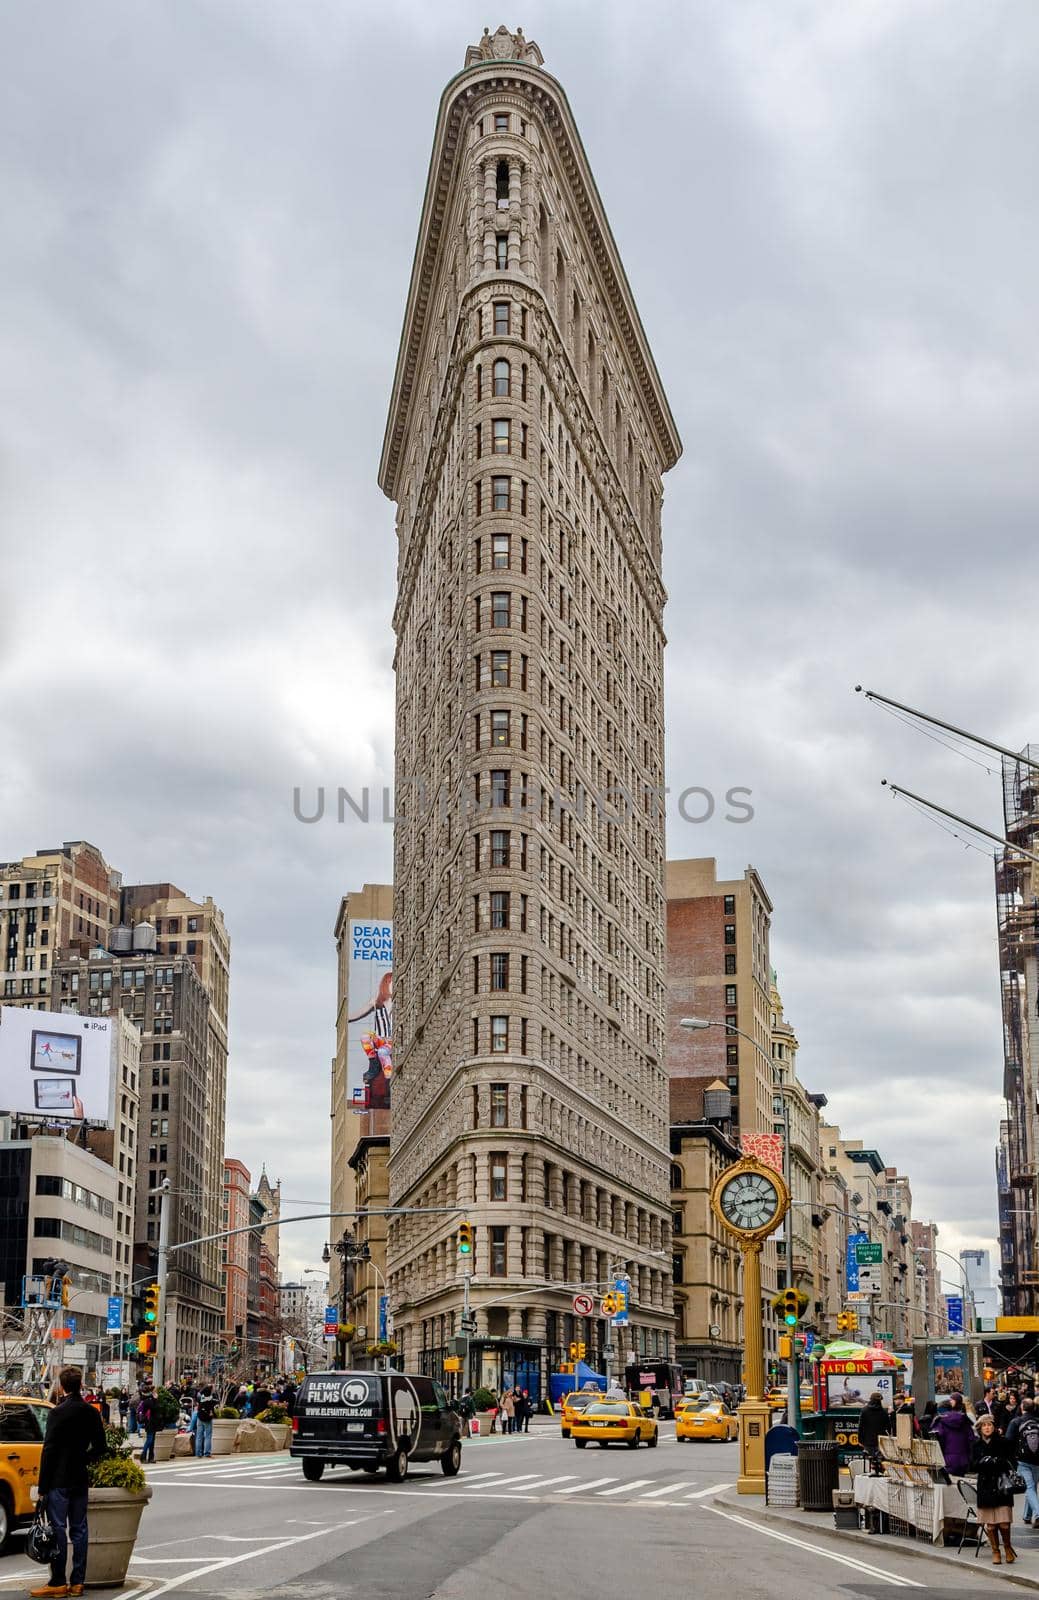 Flatiron Building New York City with street and crosswalks, yellow taxi cabs in forefront during daytime with overcast, view from low angle, vertical